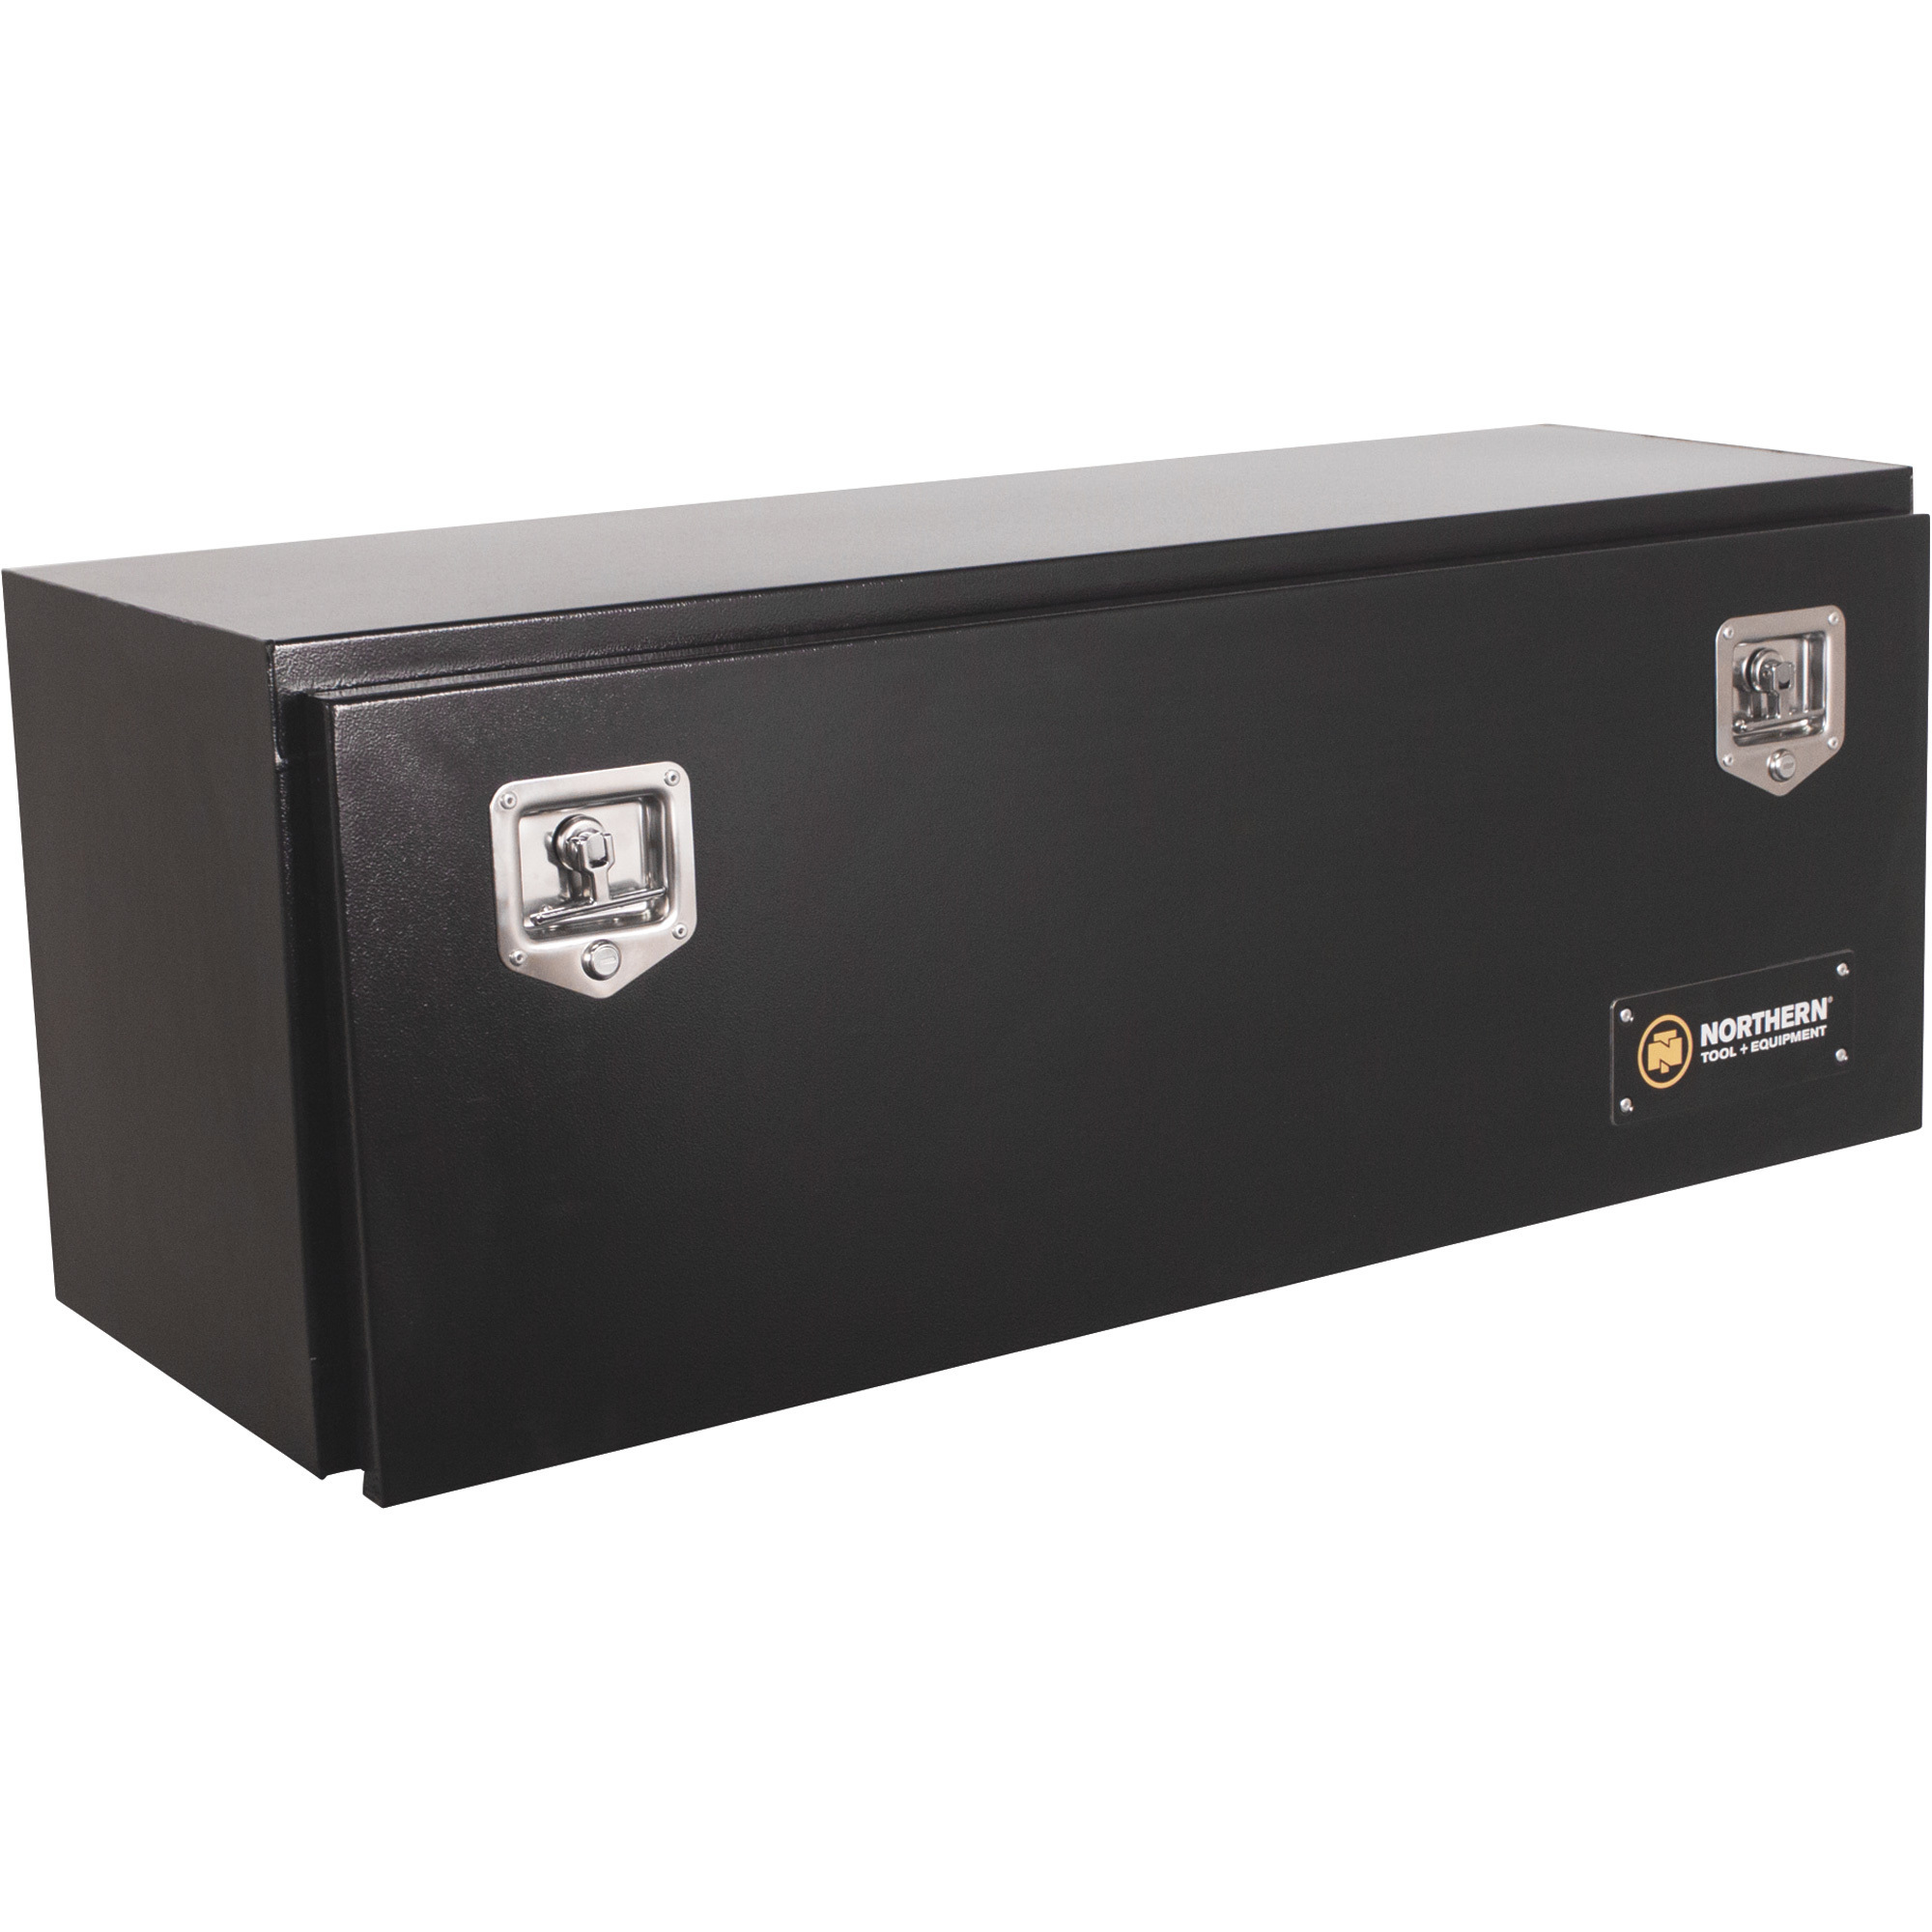 Pickup in Rib Lake. Lockable steel tool box or trunk with